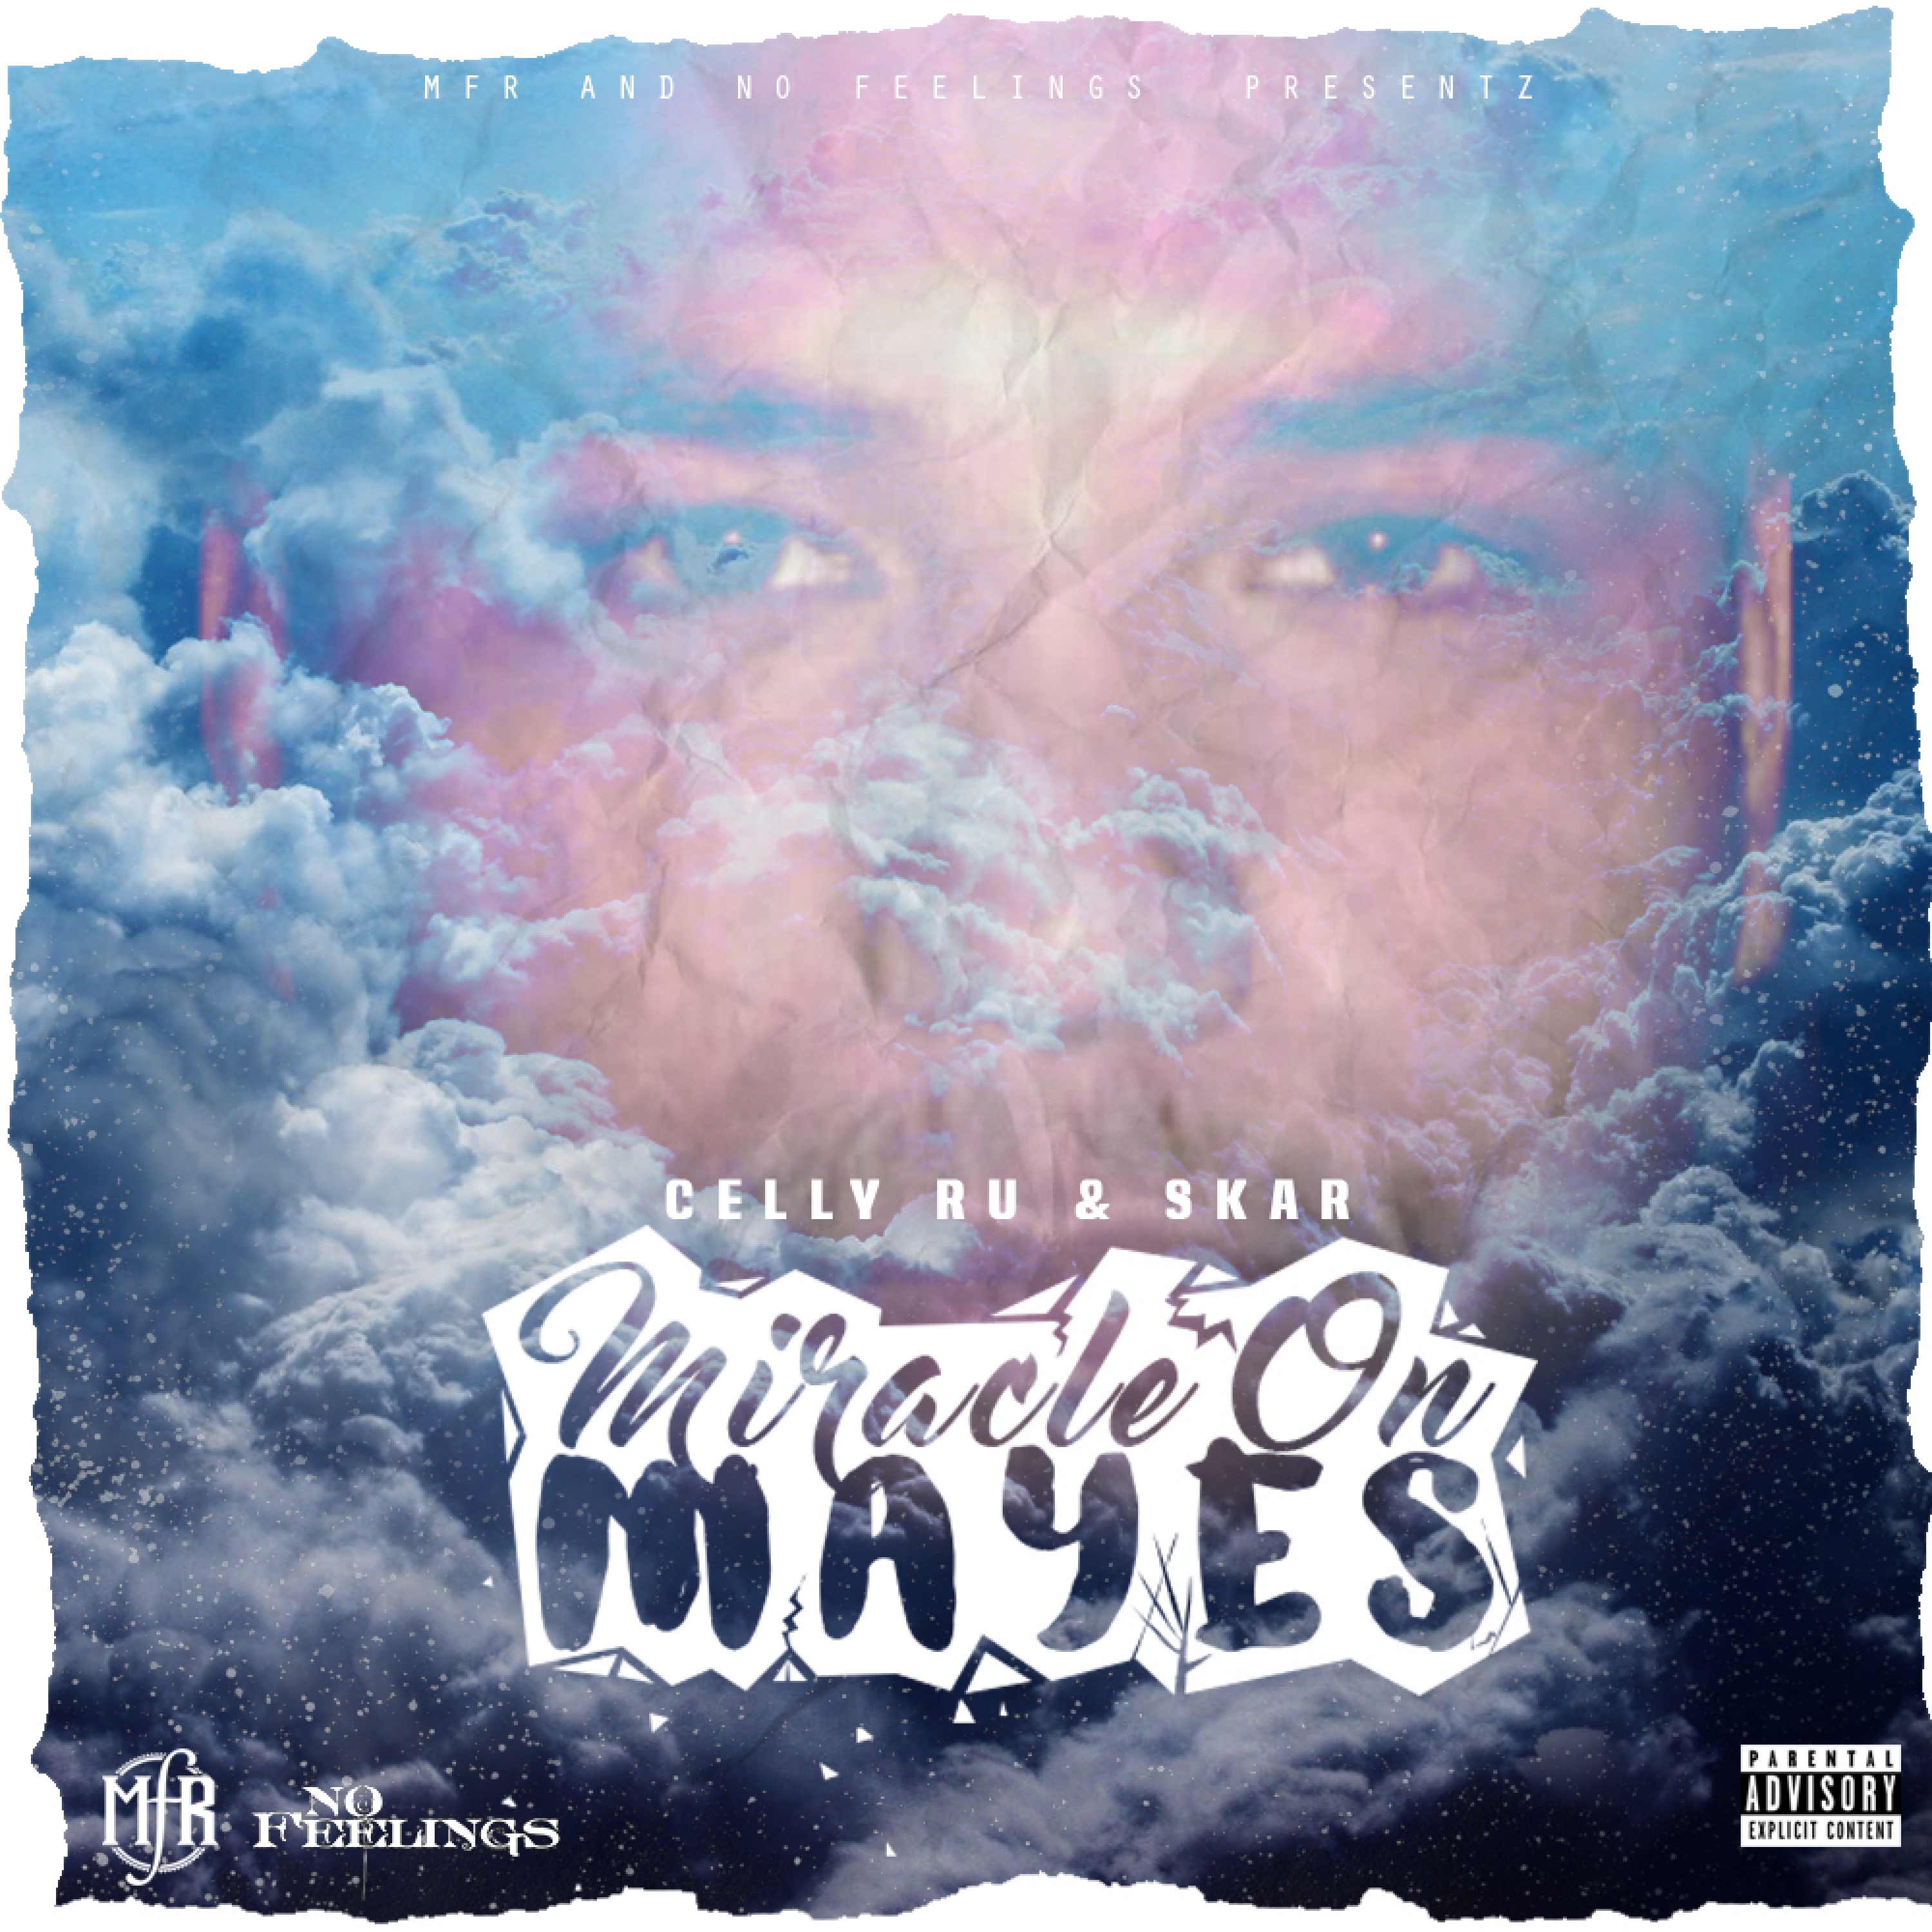 DJ Ghost Presentz: Miracle on Mayes